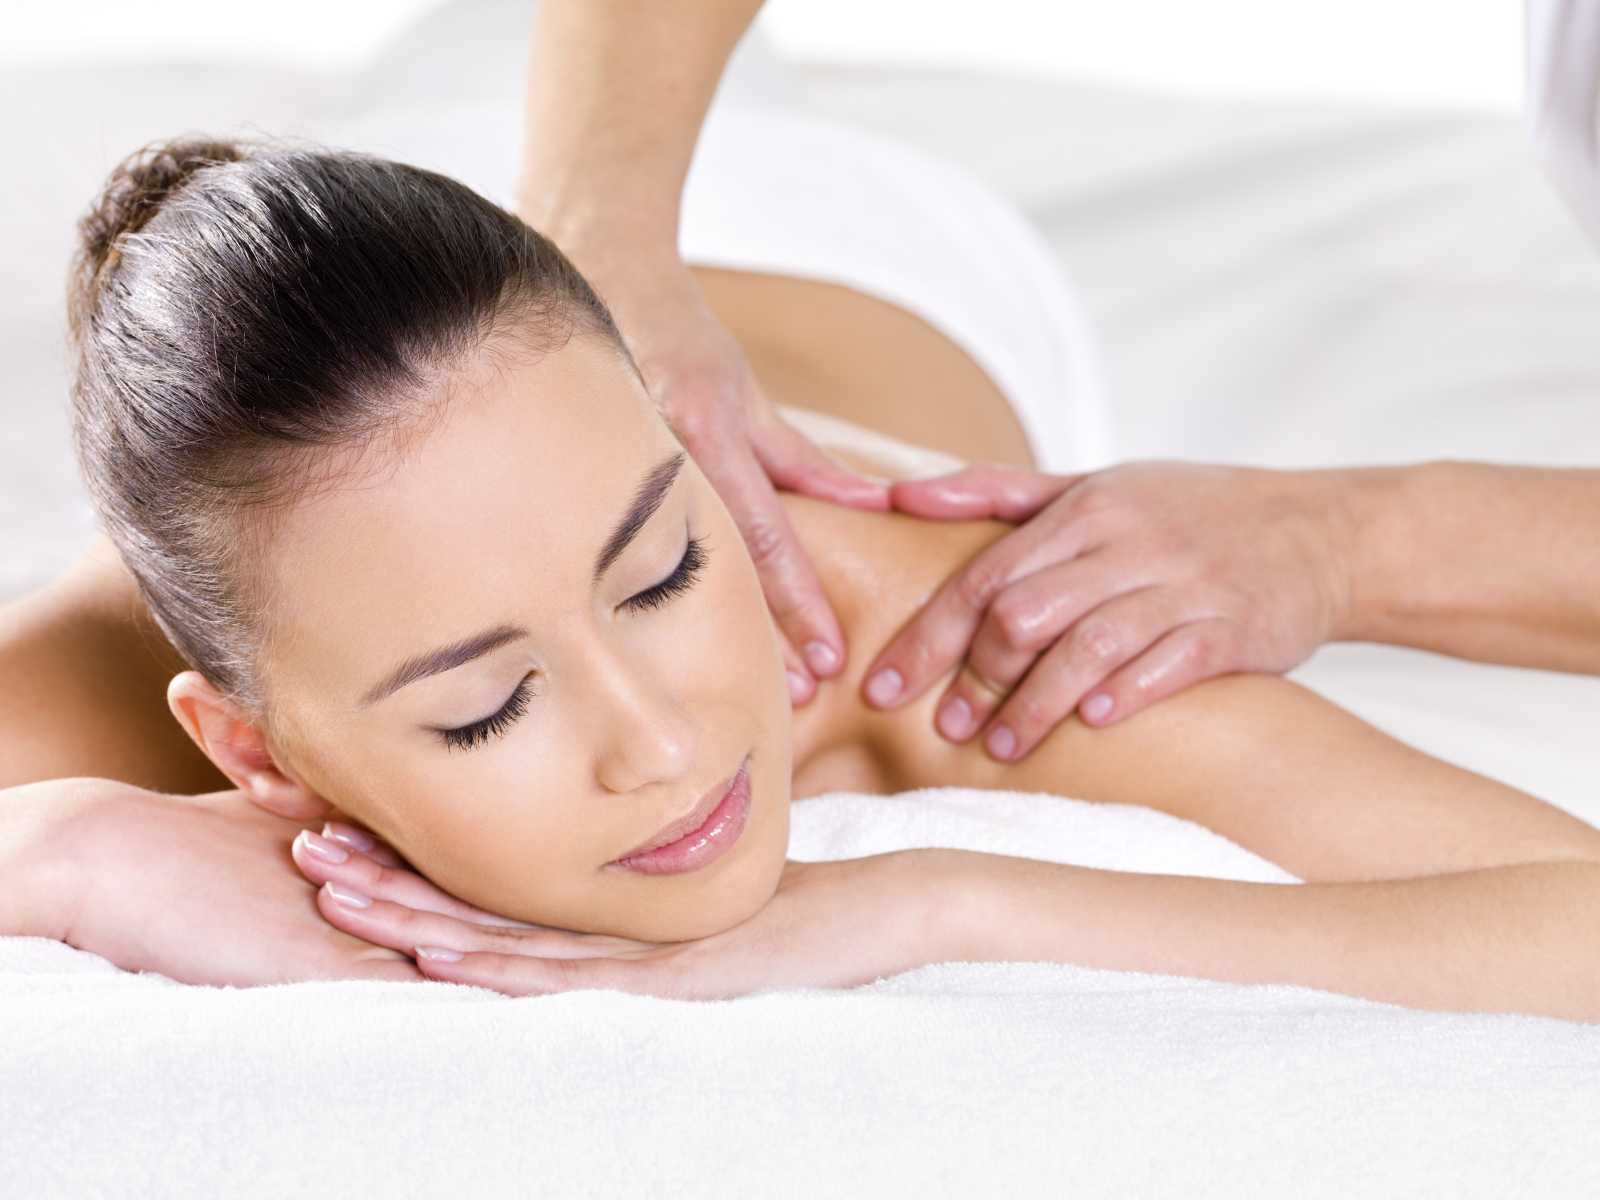 Massage Therapy - Full Body Massage In Cape Town , HD Wallpaper & Backgrounds